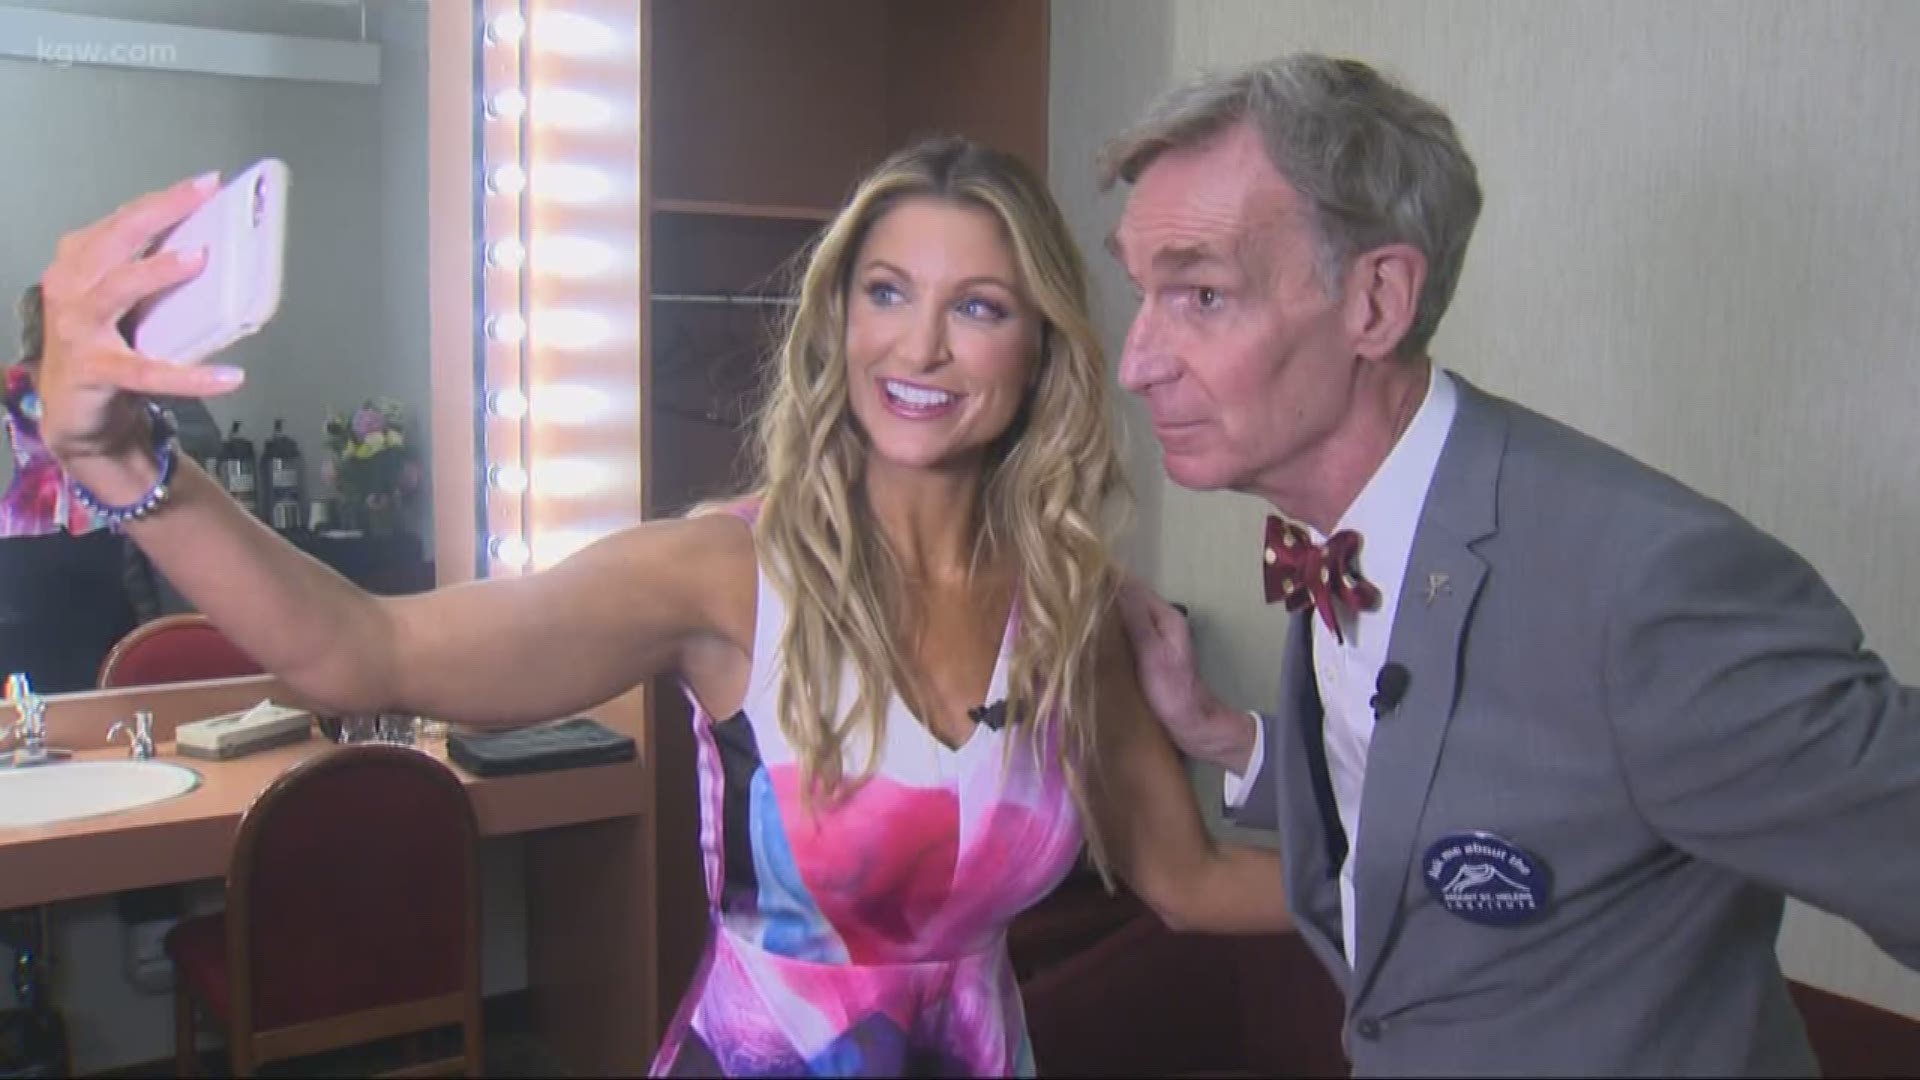 Selfie 101 with Bill Nye the Science Guy